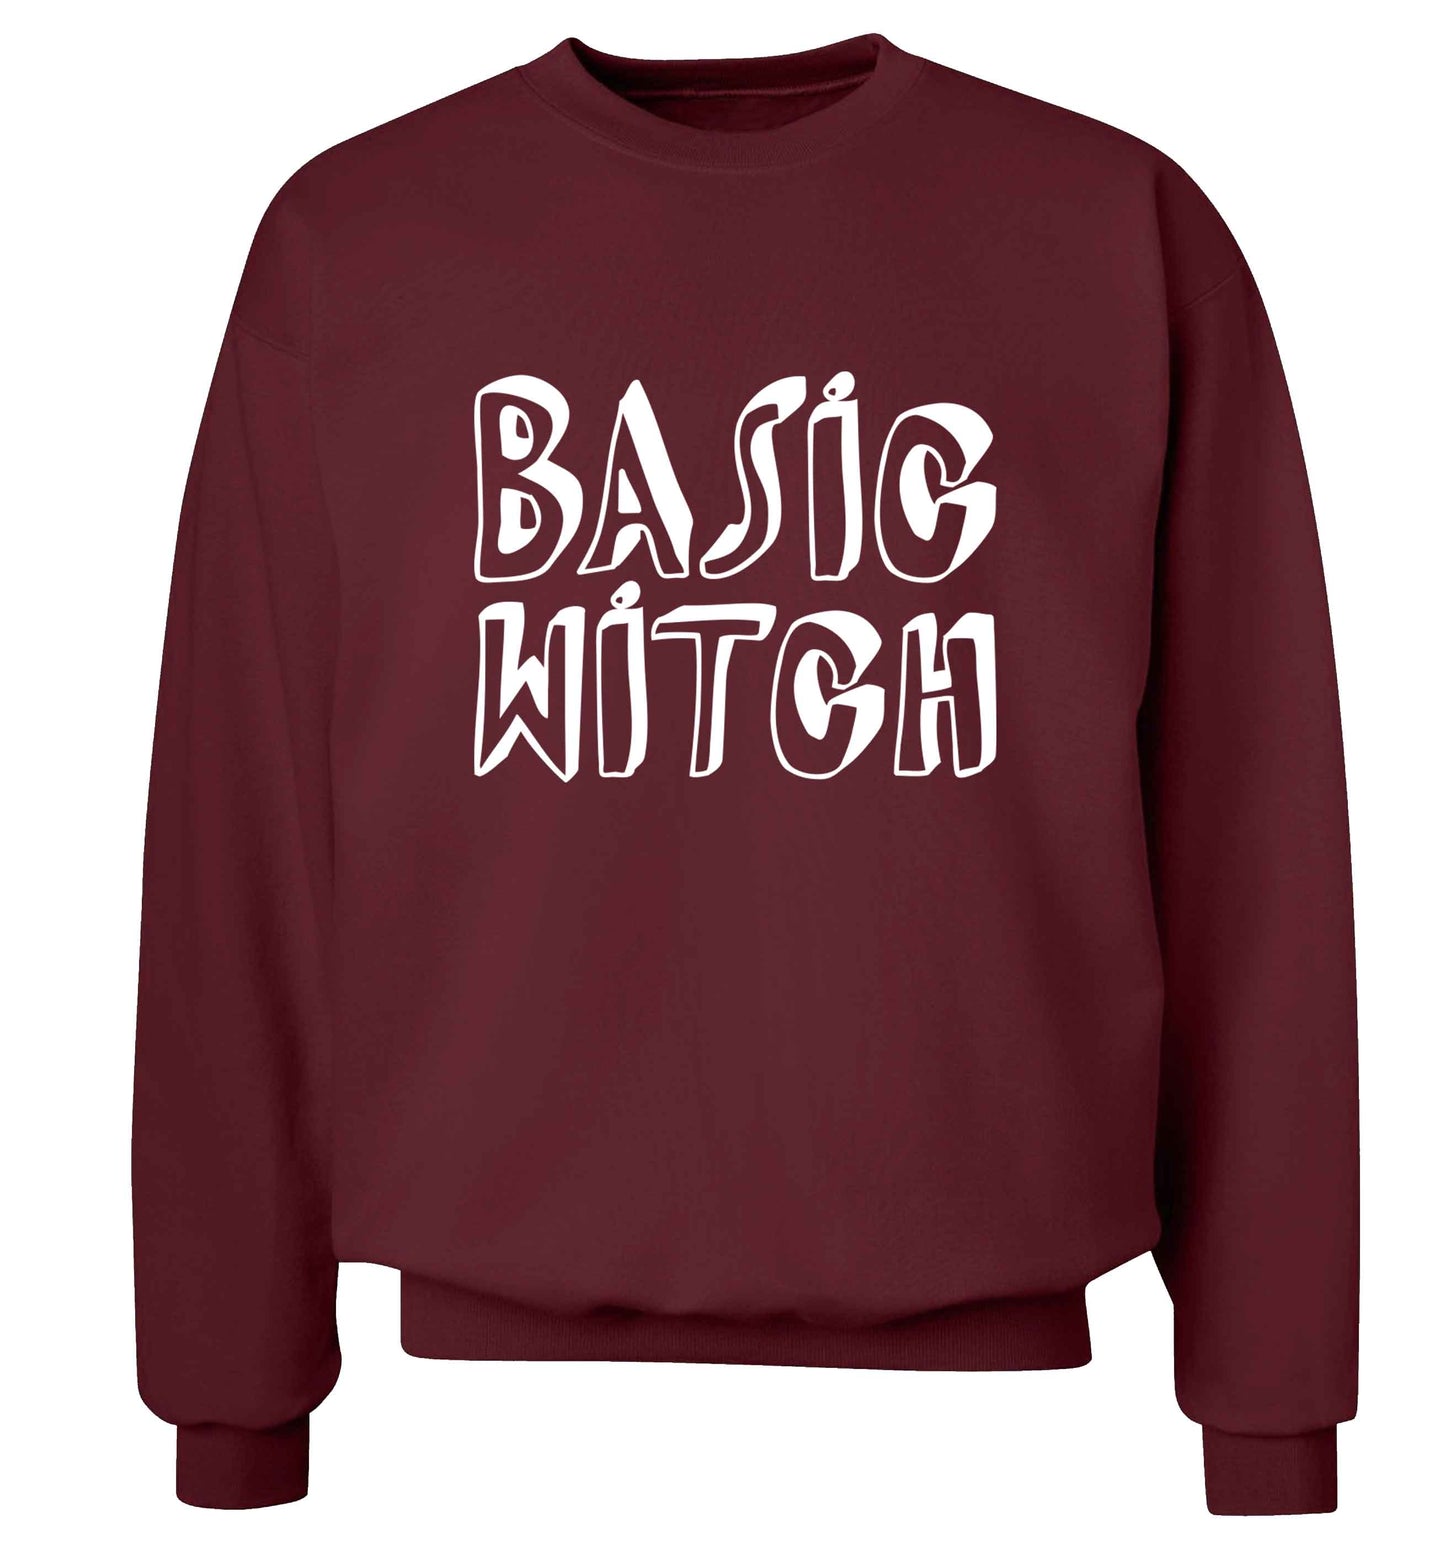 Basic witch adult's unisex maroon sweater 2XL